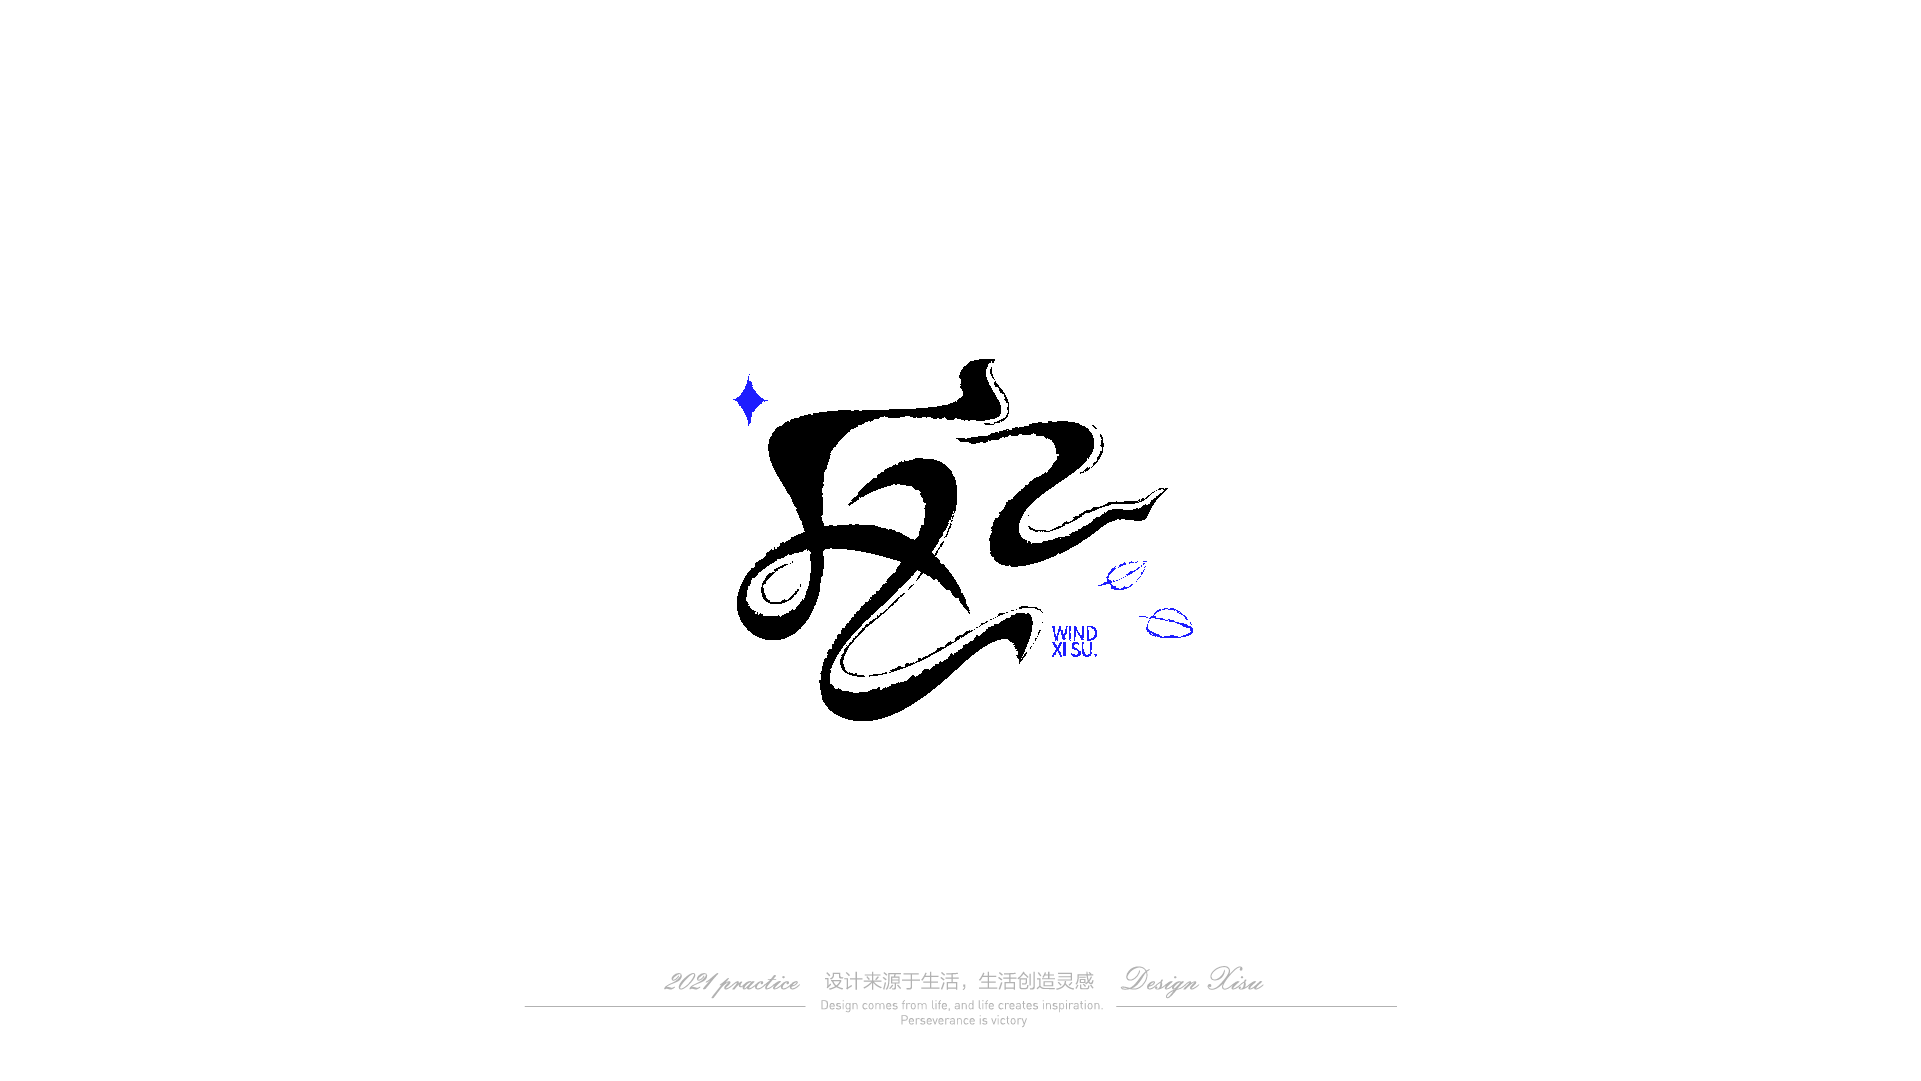 20P Collection of the latest Chinese font design schemes in 2021 #.587